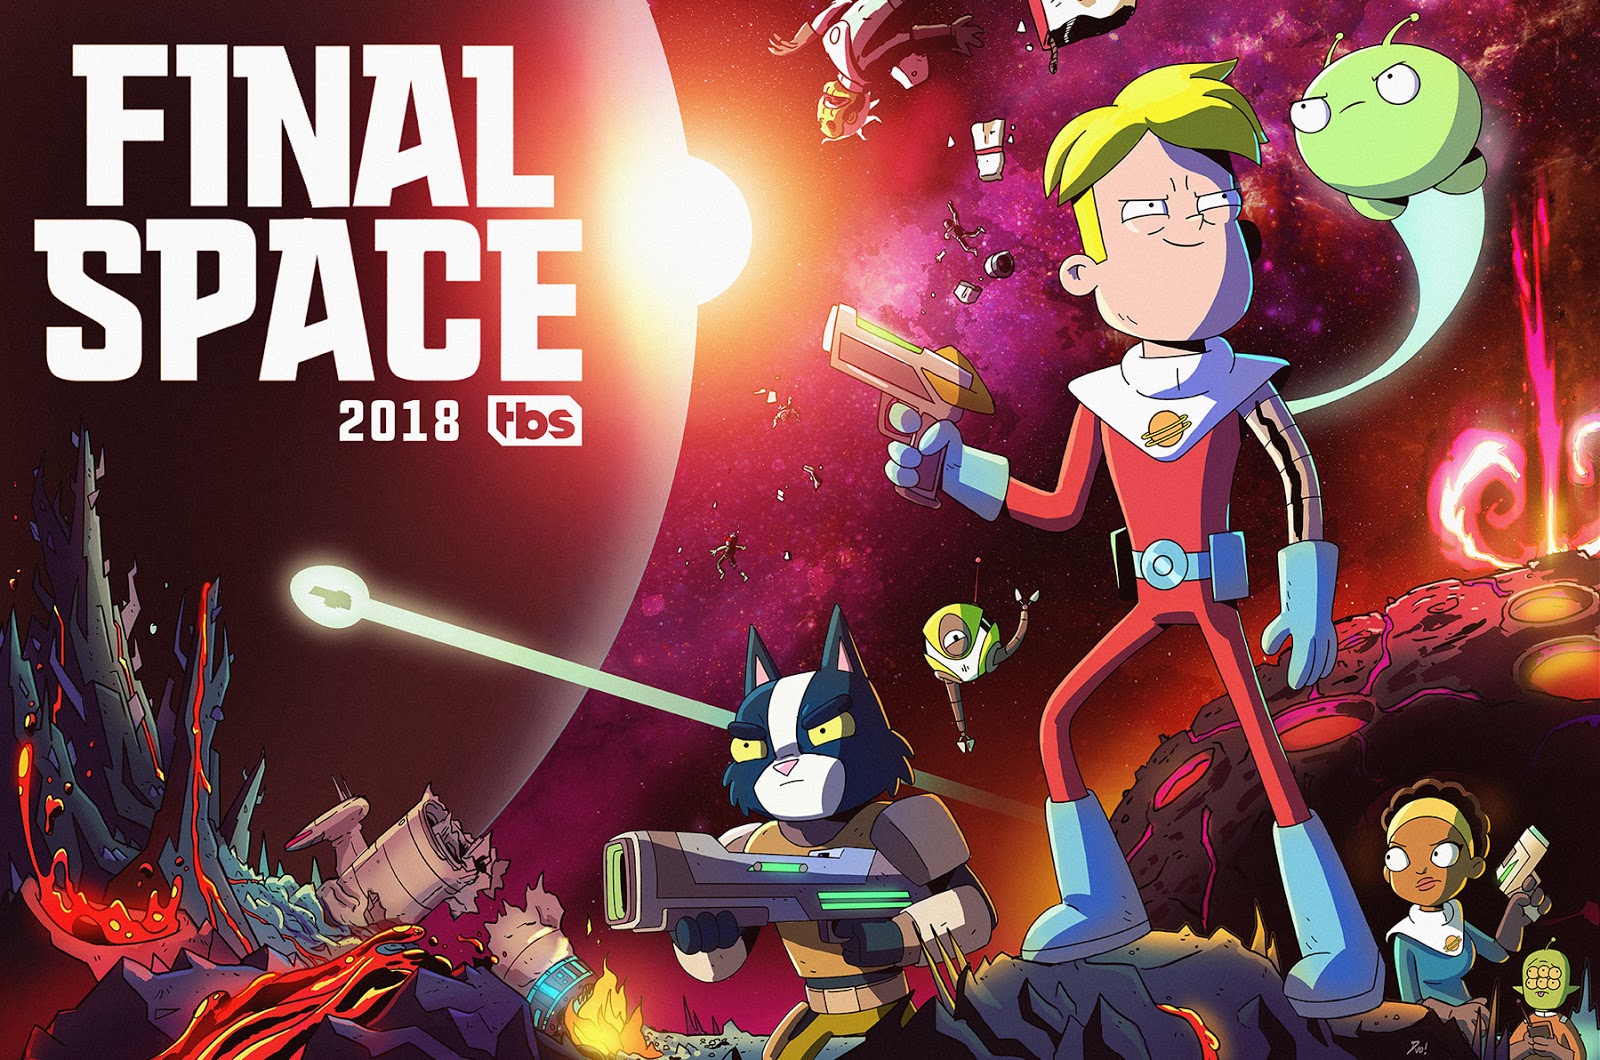 USA - FINAL SPACE Episodes 1 & 2 Available Now On The TBS App